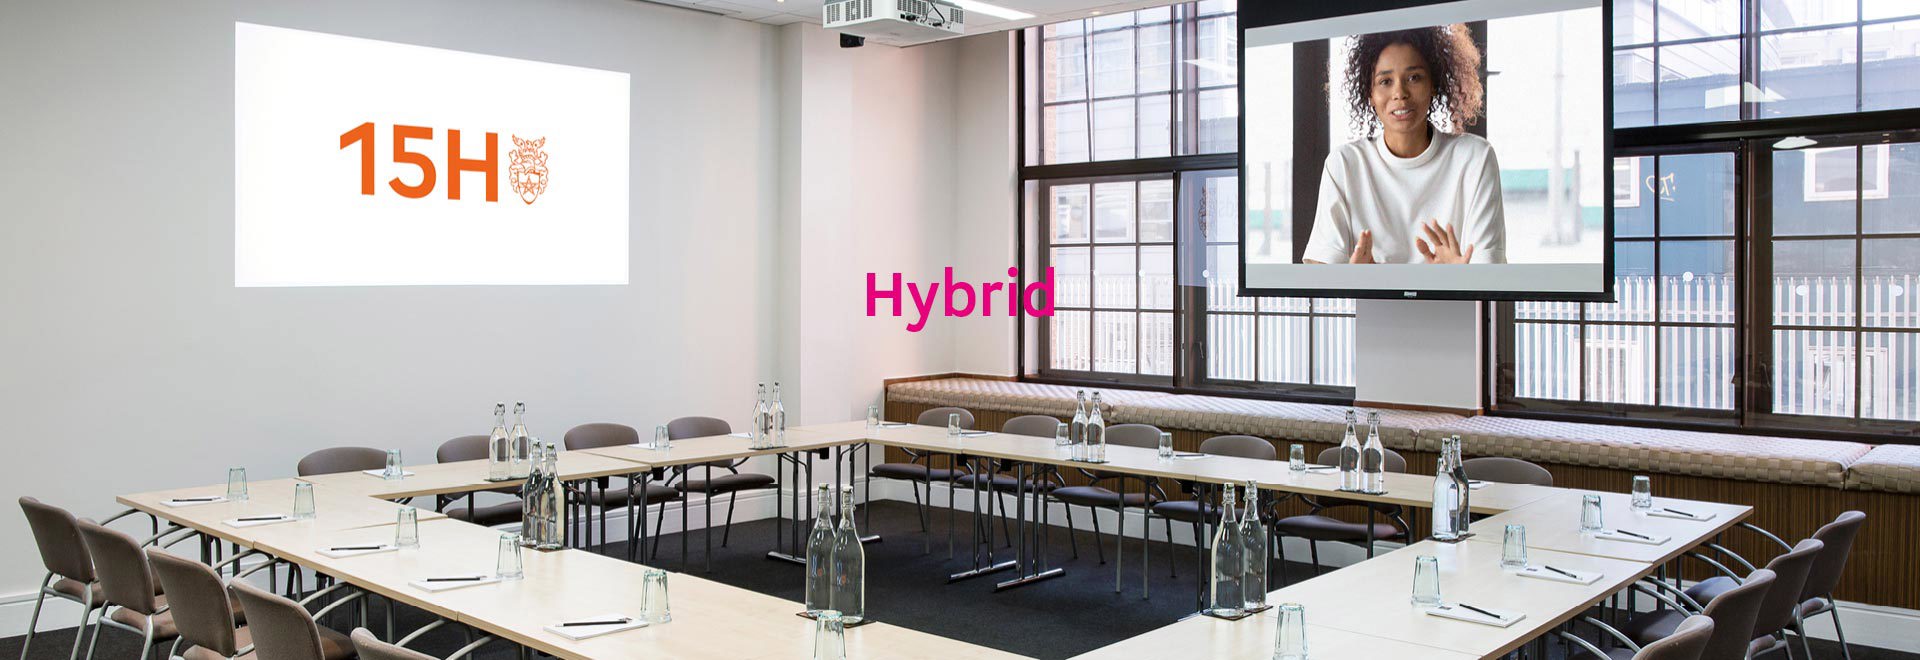 15Hatfields meeting room with boardroom seating and the words 'Hybrid'